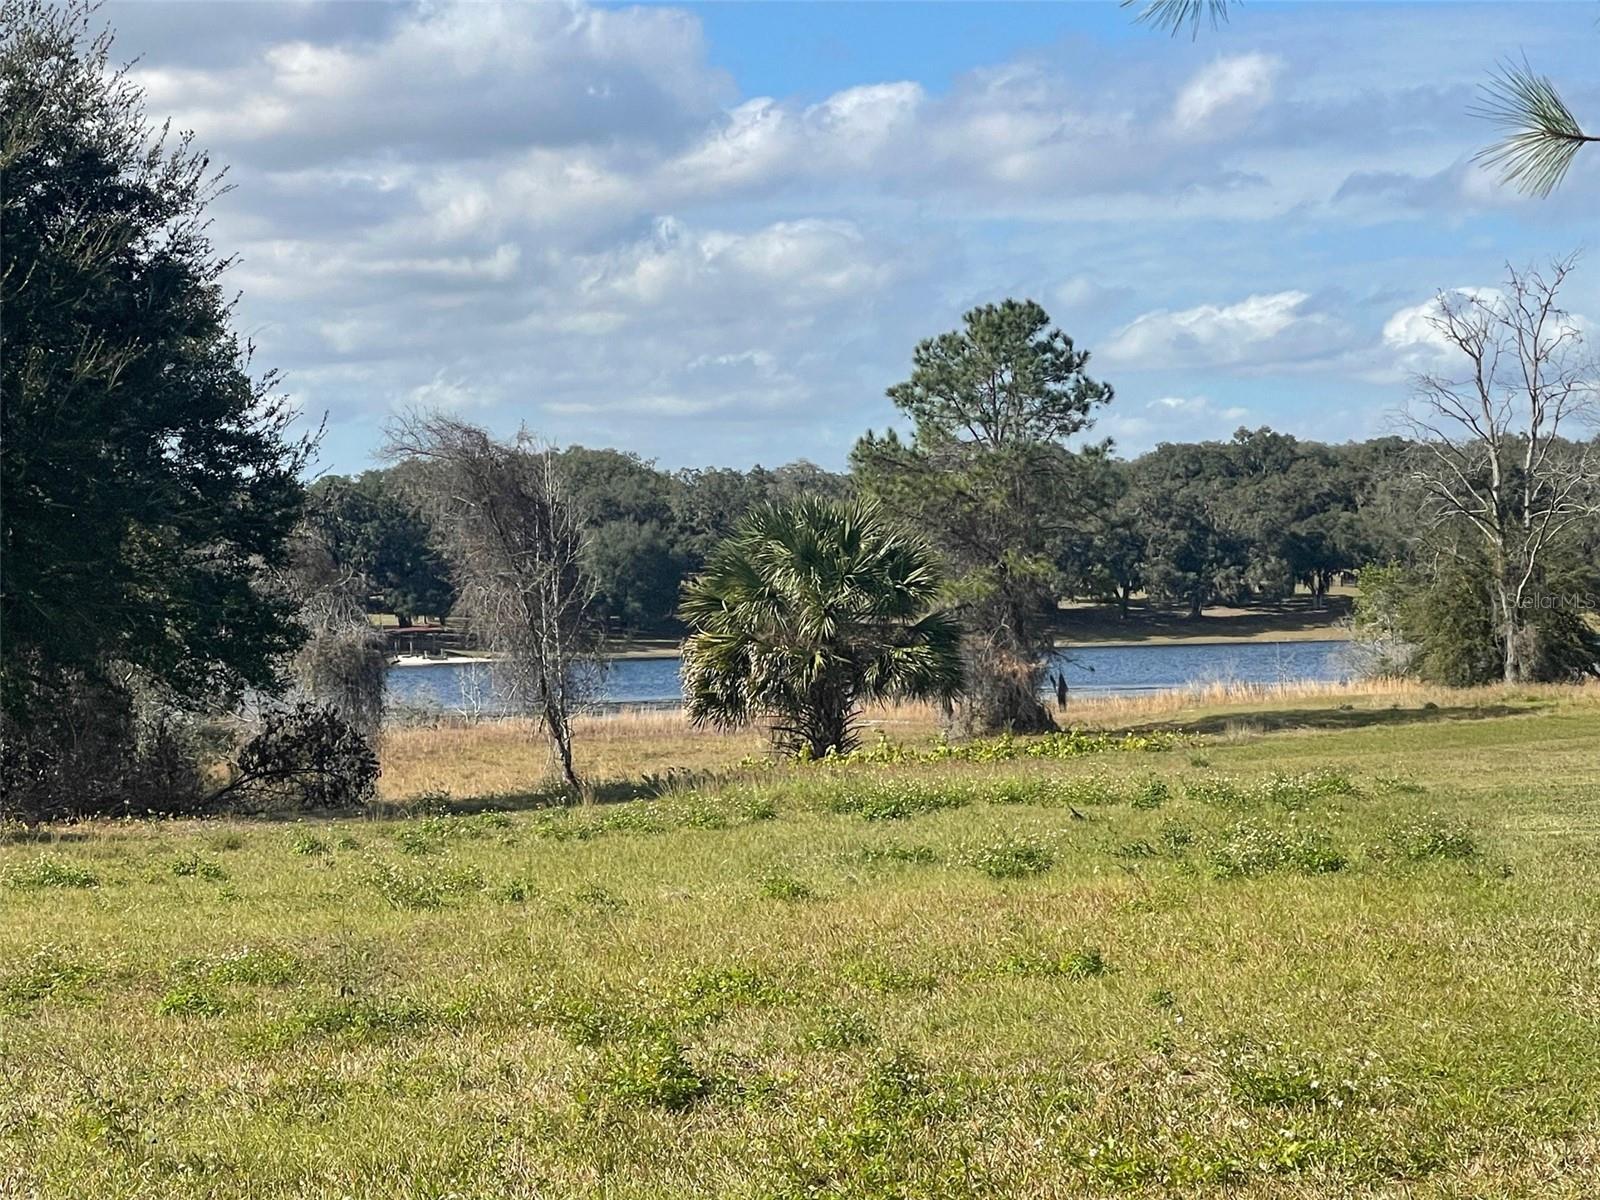 Details for Lot 2 Grays Airport Road, LADY LAKE, FL 32159